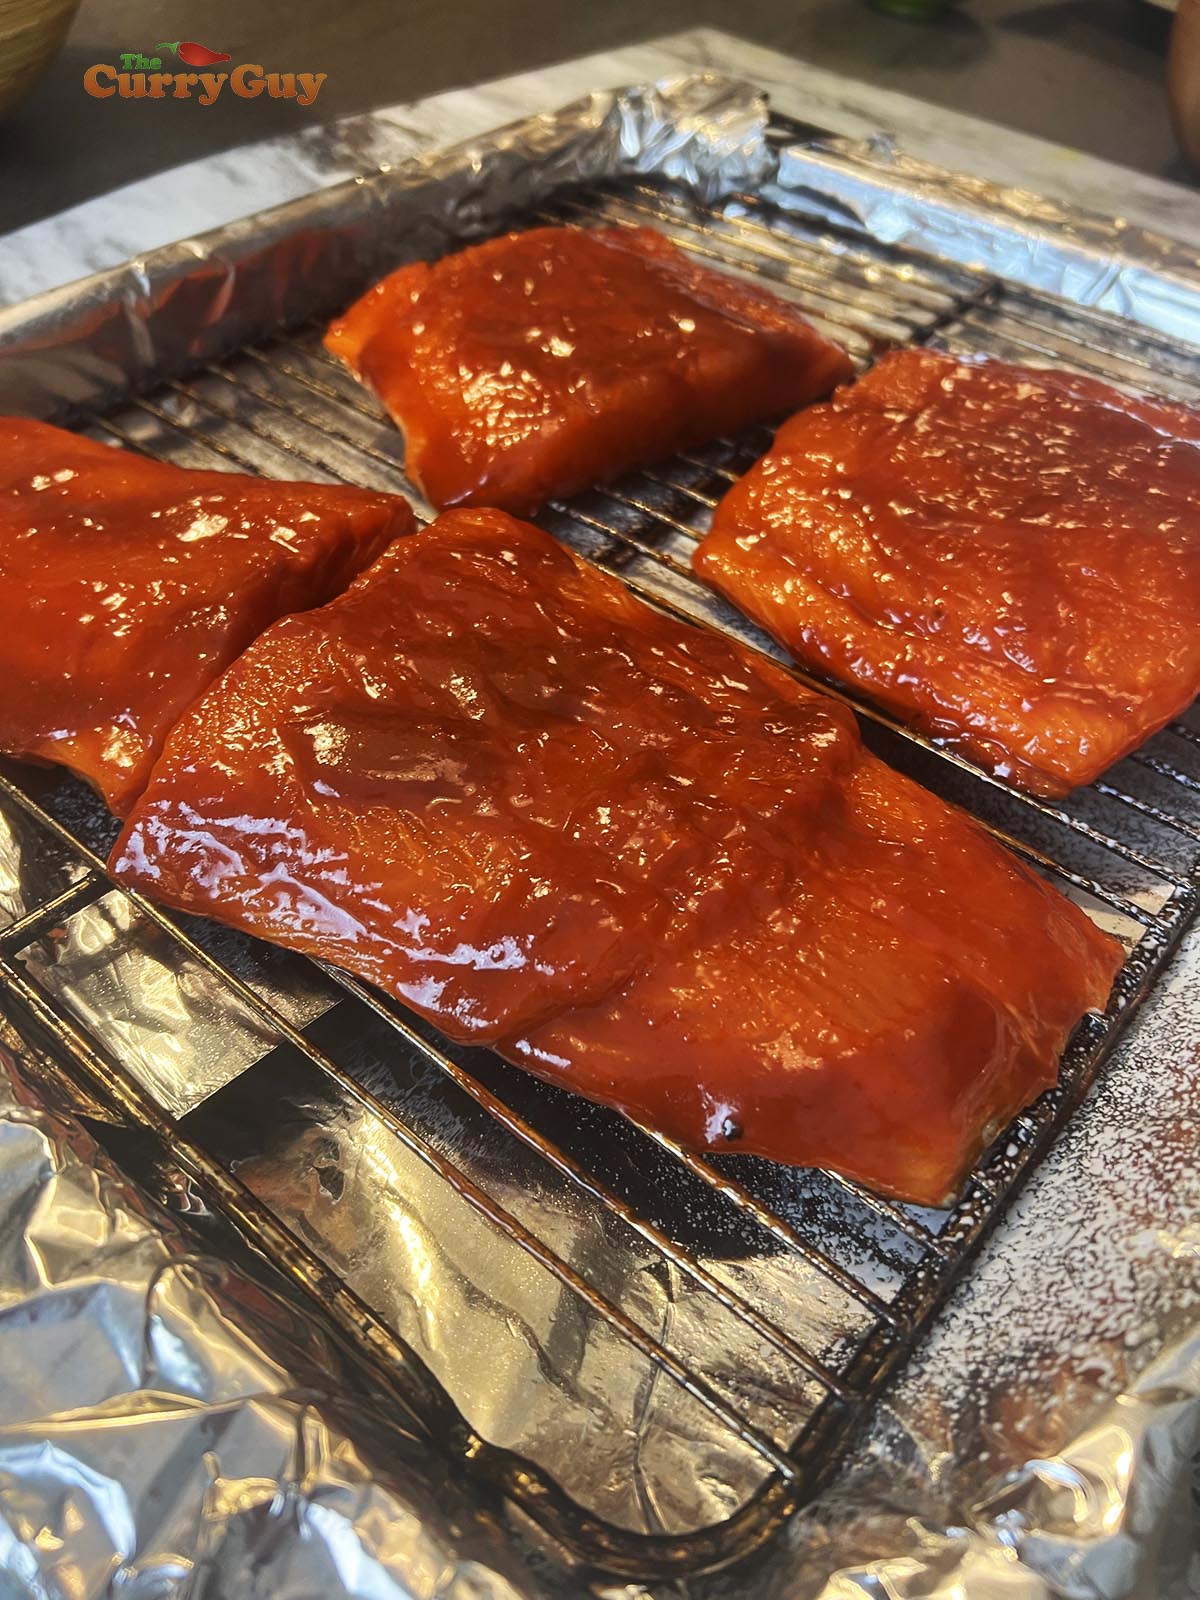 Salmon ready to cook.